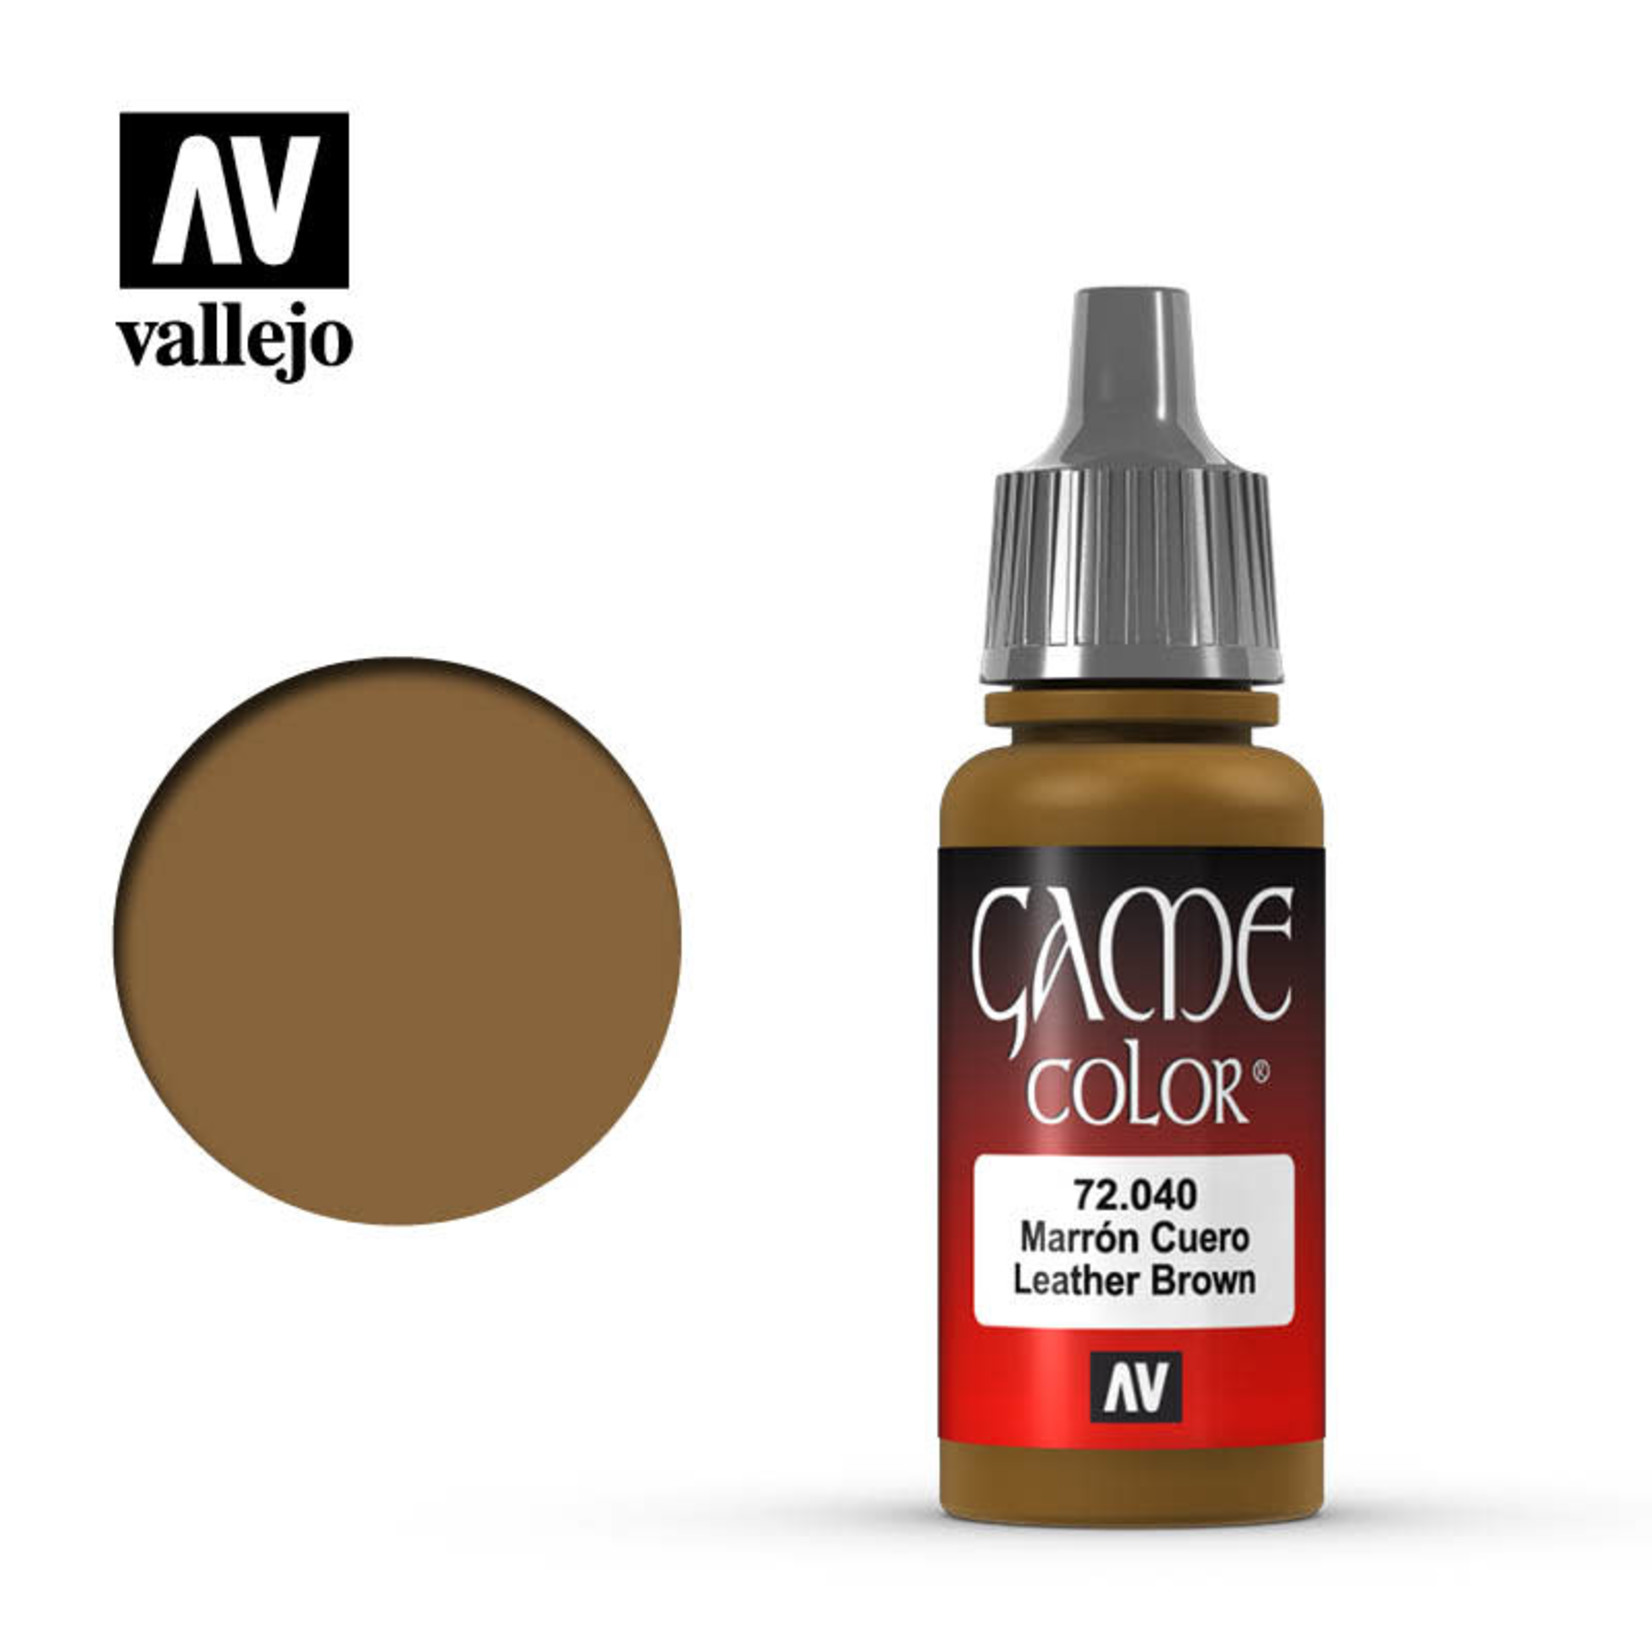 Vallejo Paint Leather Brown (GC) 72.040